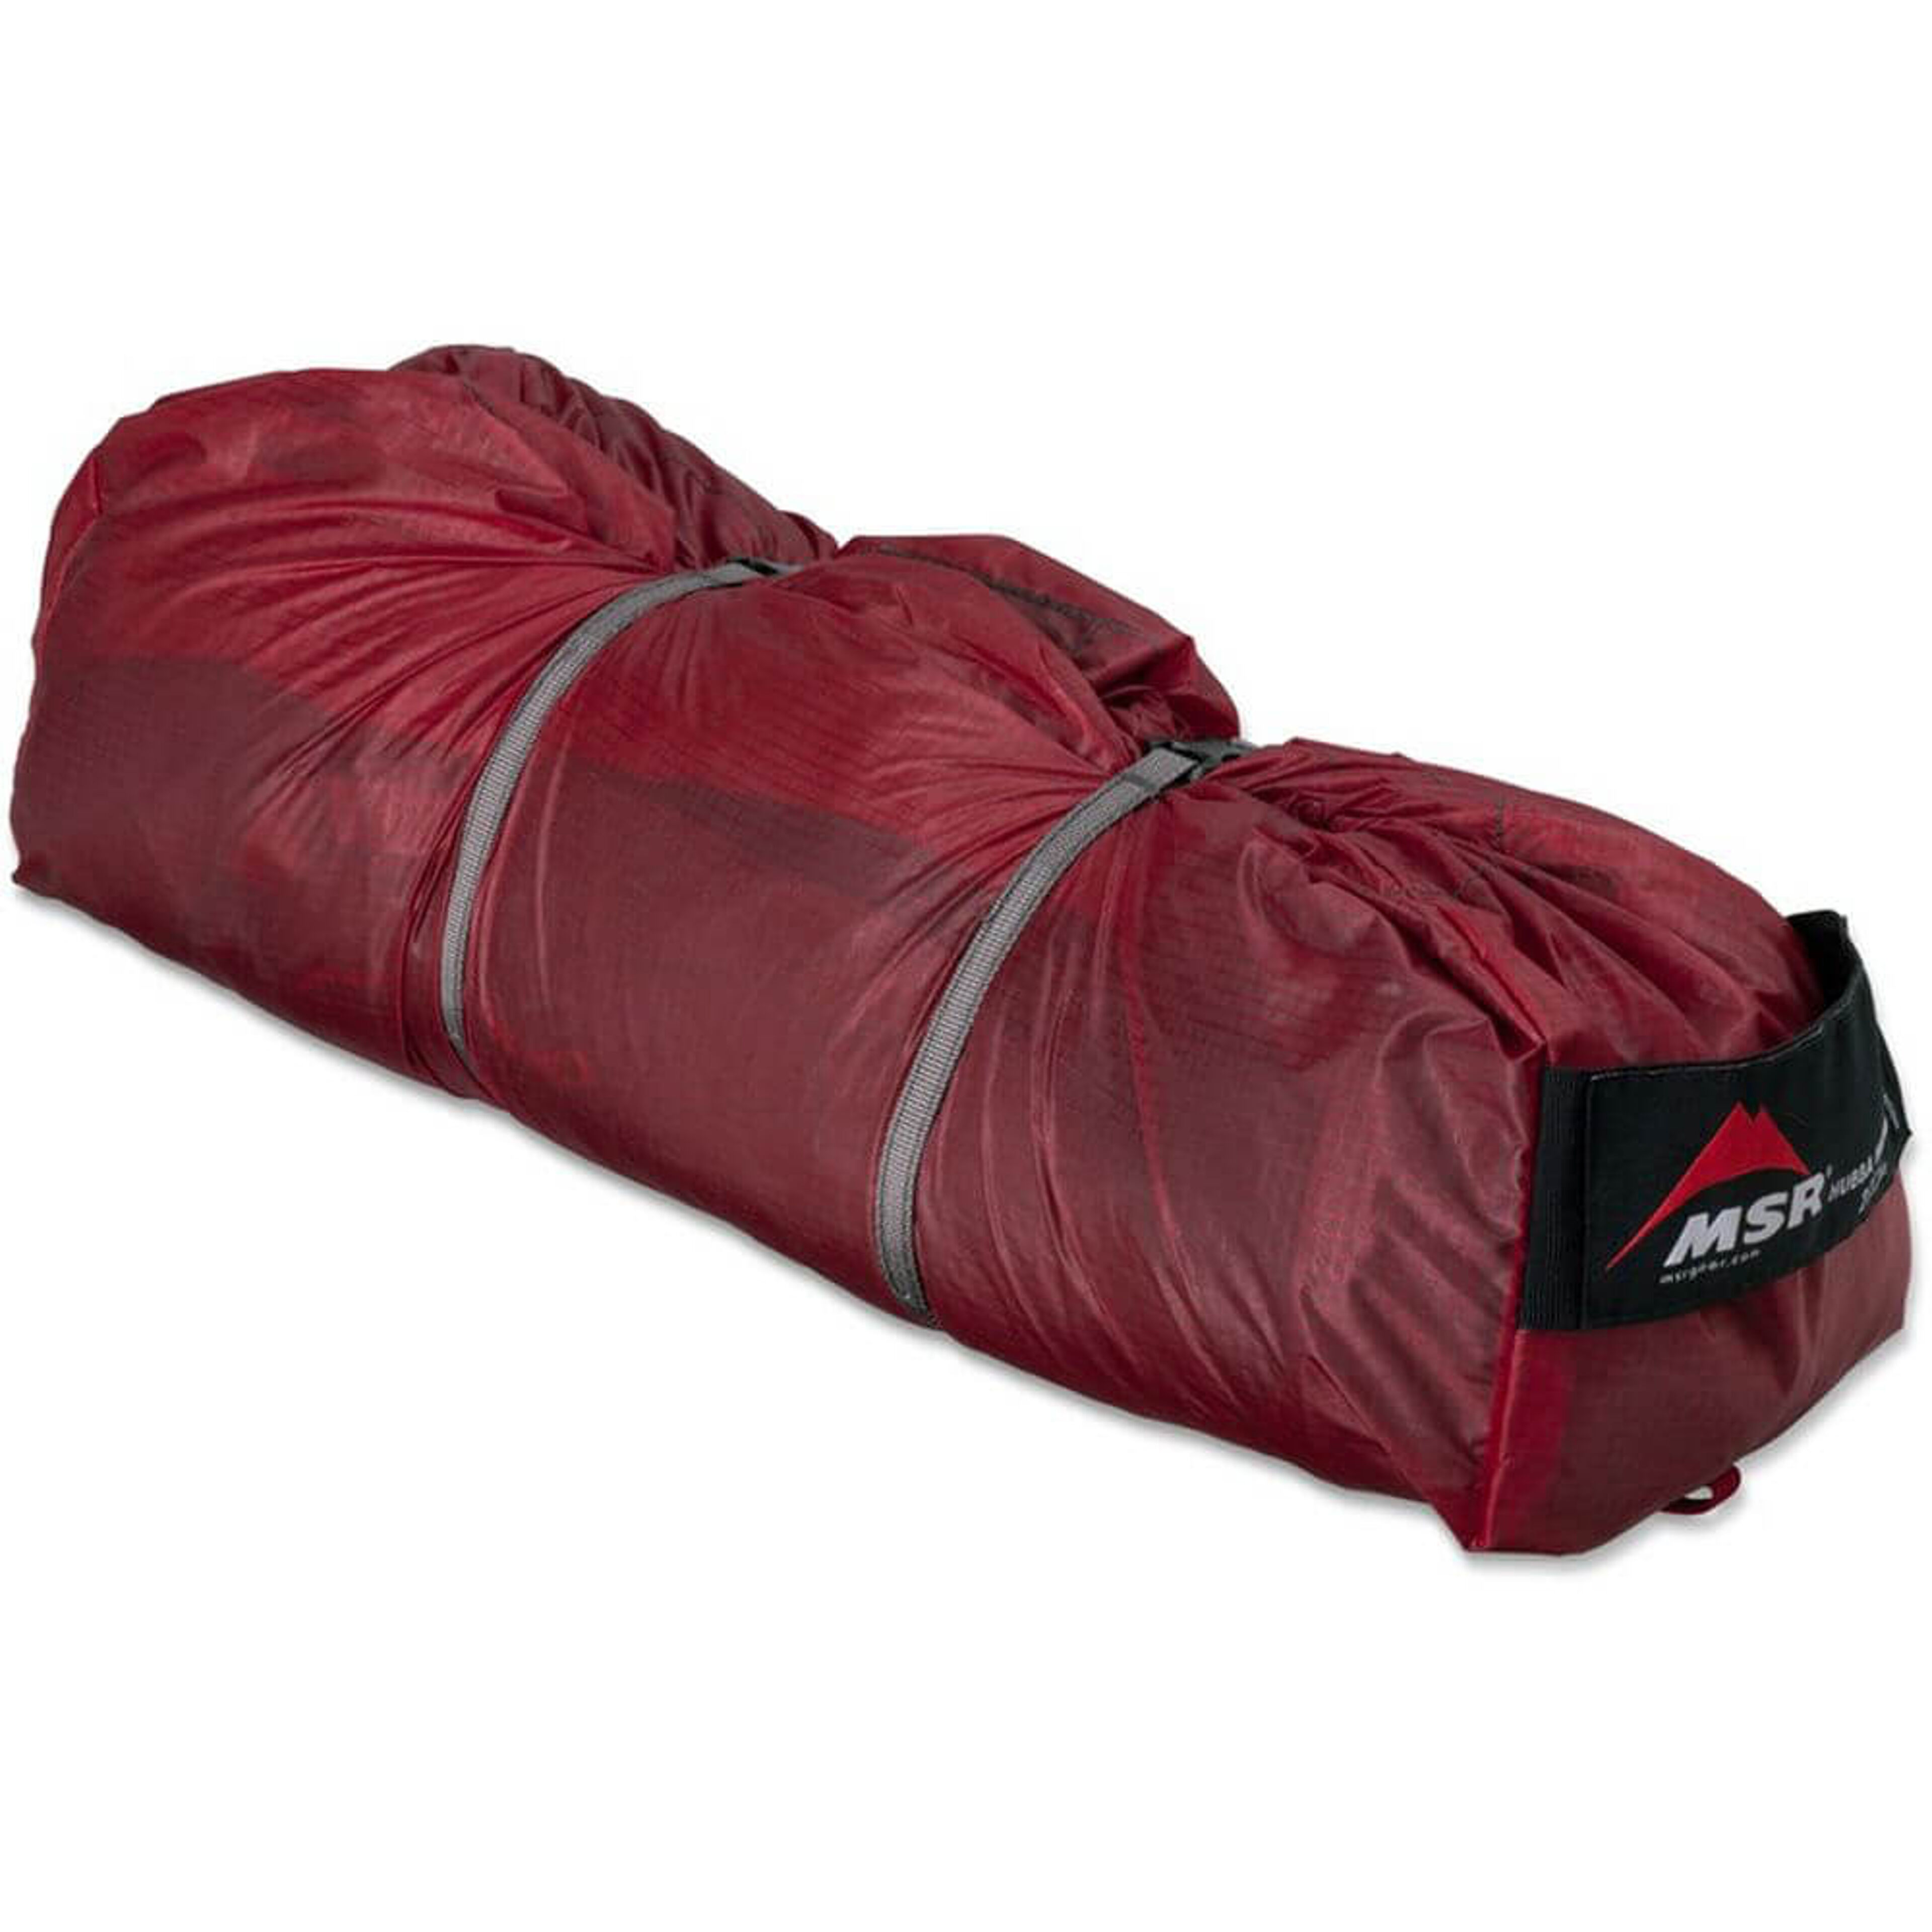 MSR Hubba NX solo backpacking tent